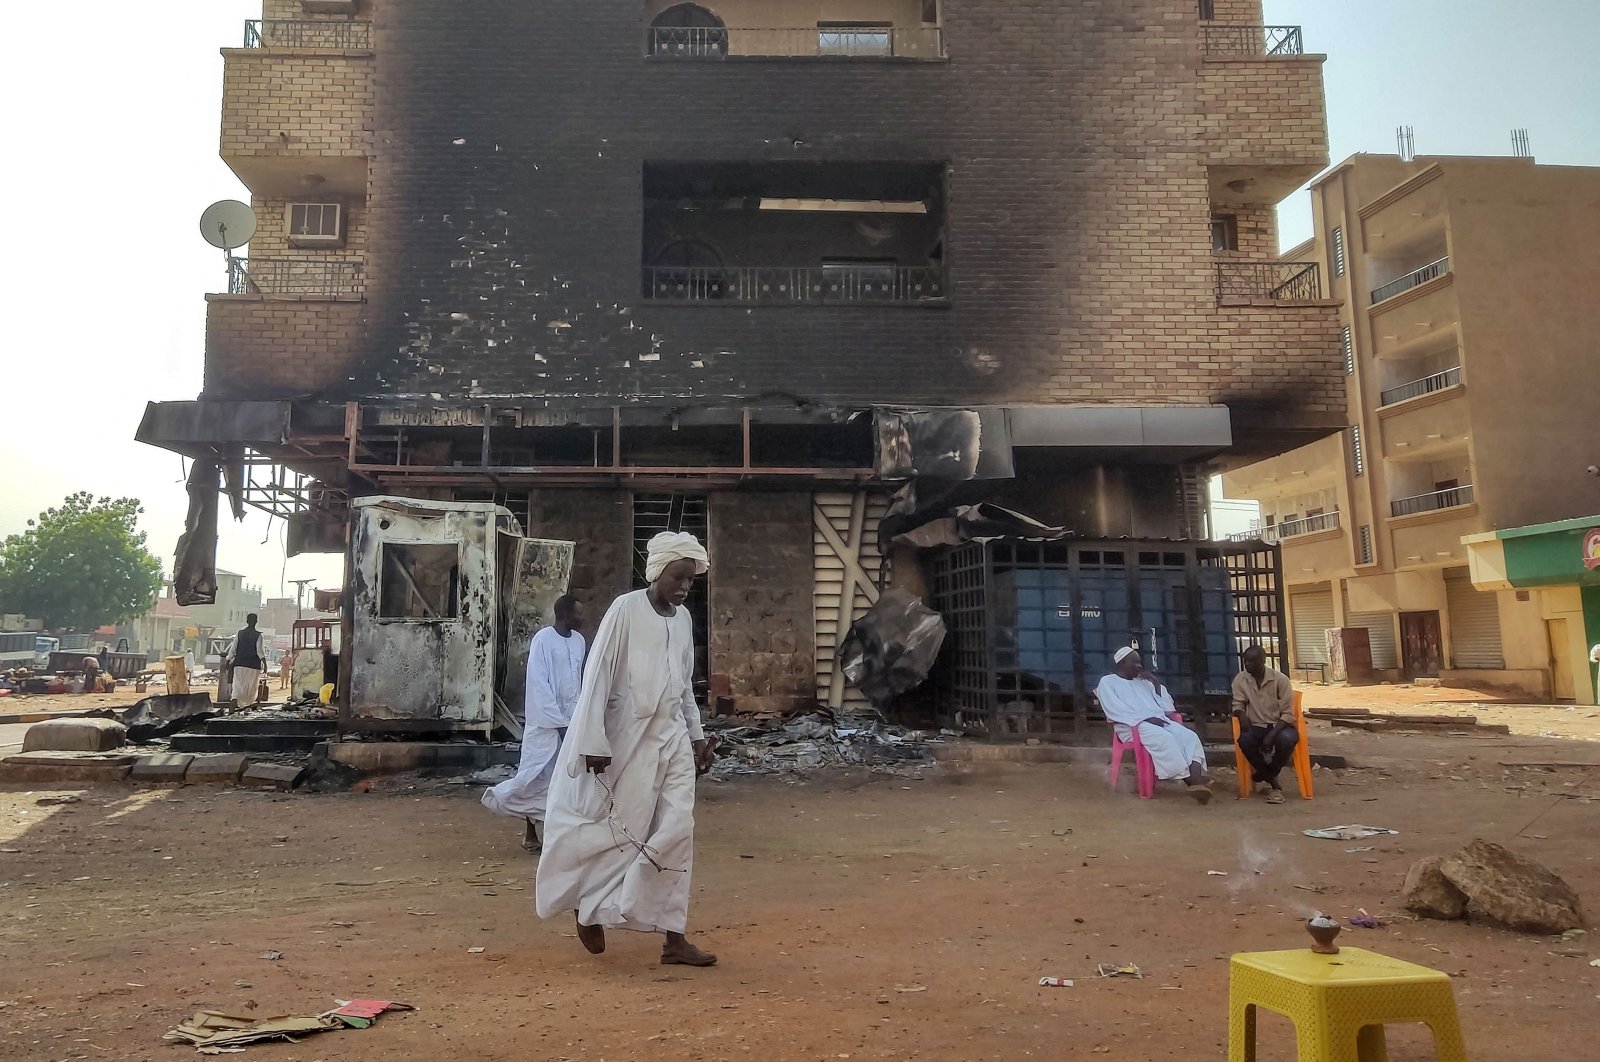 Men walk past others sitting outside a burn-down bank branch in southern Khartoum, Sudan, May 24, 2023. (AFP Photo)